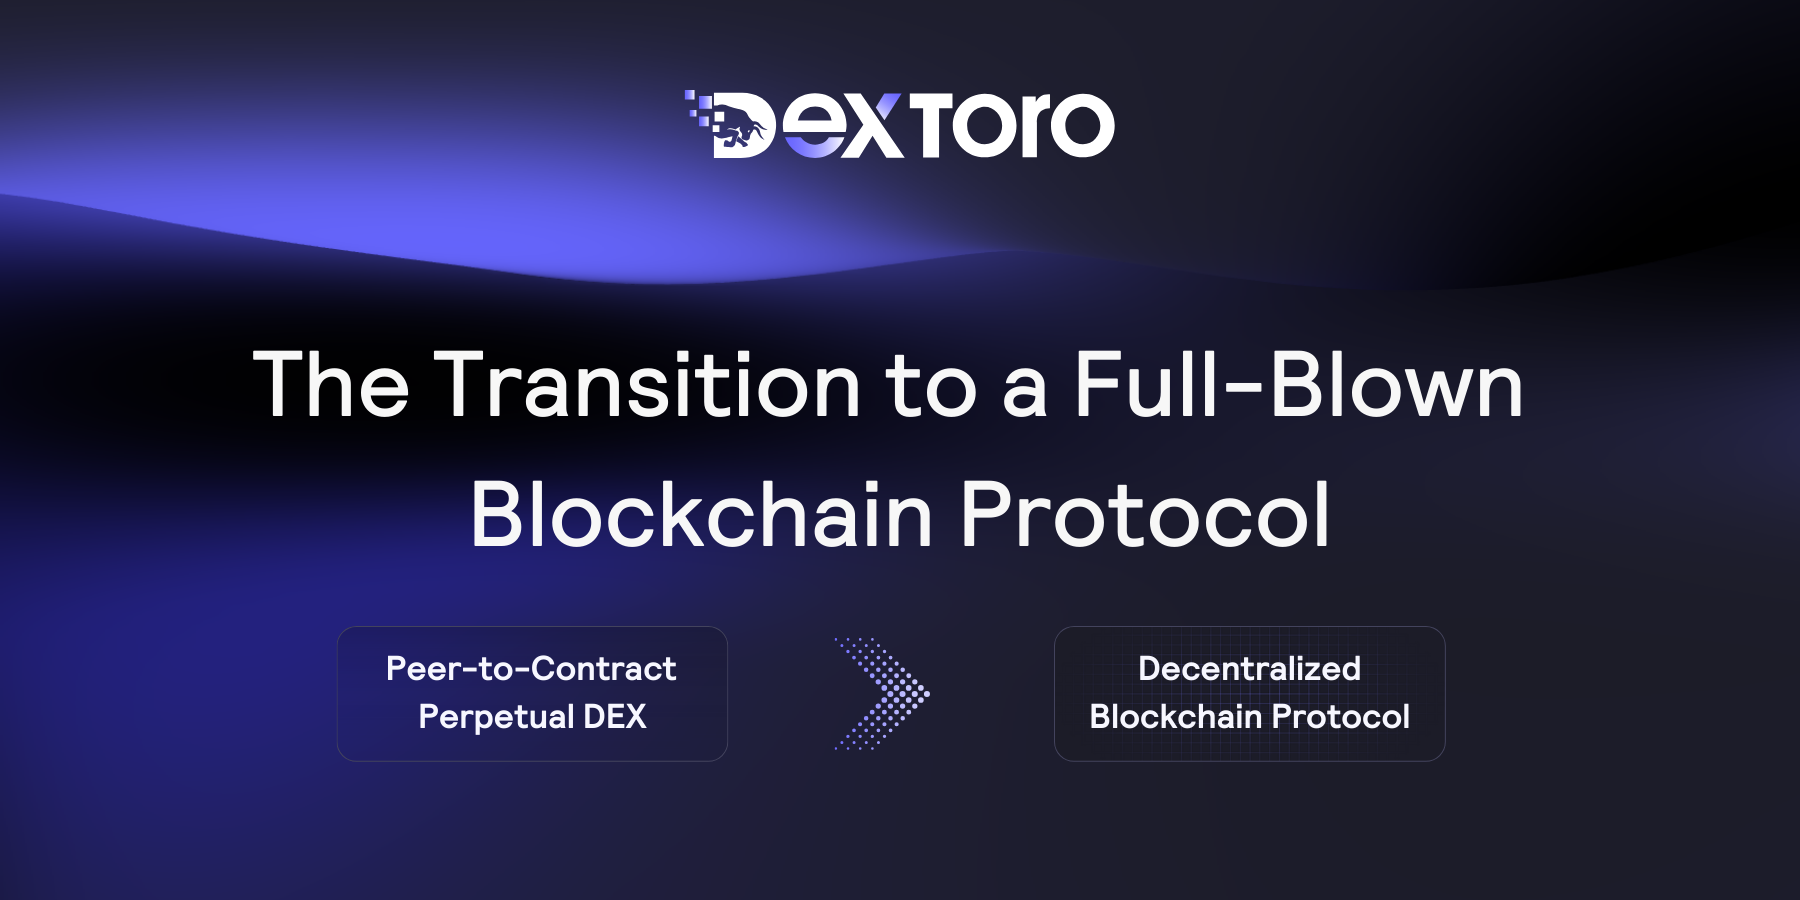 DexToro's Evolution: From Peer-to-Contract DEX to Comprehensive Decentralized Derivatives Protocol